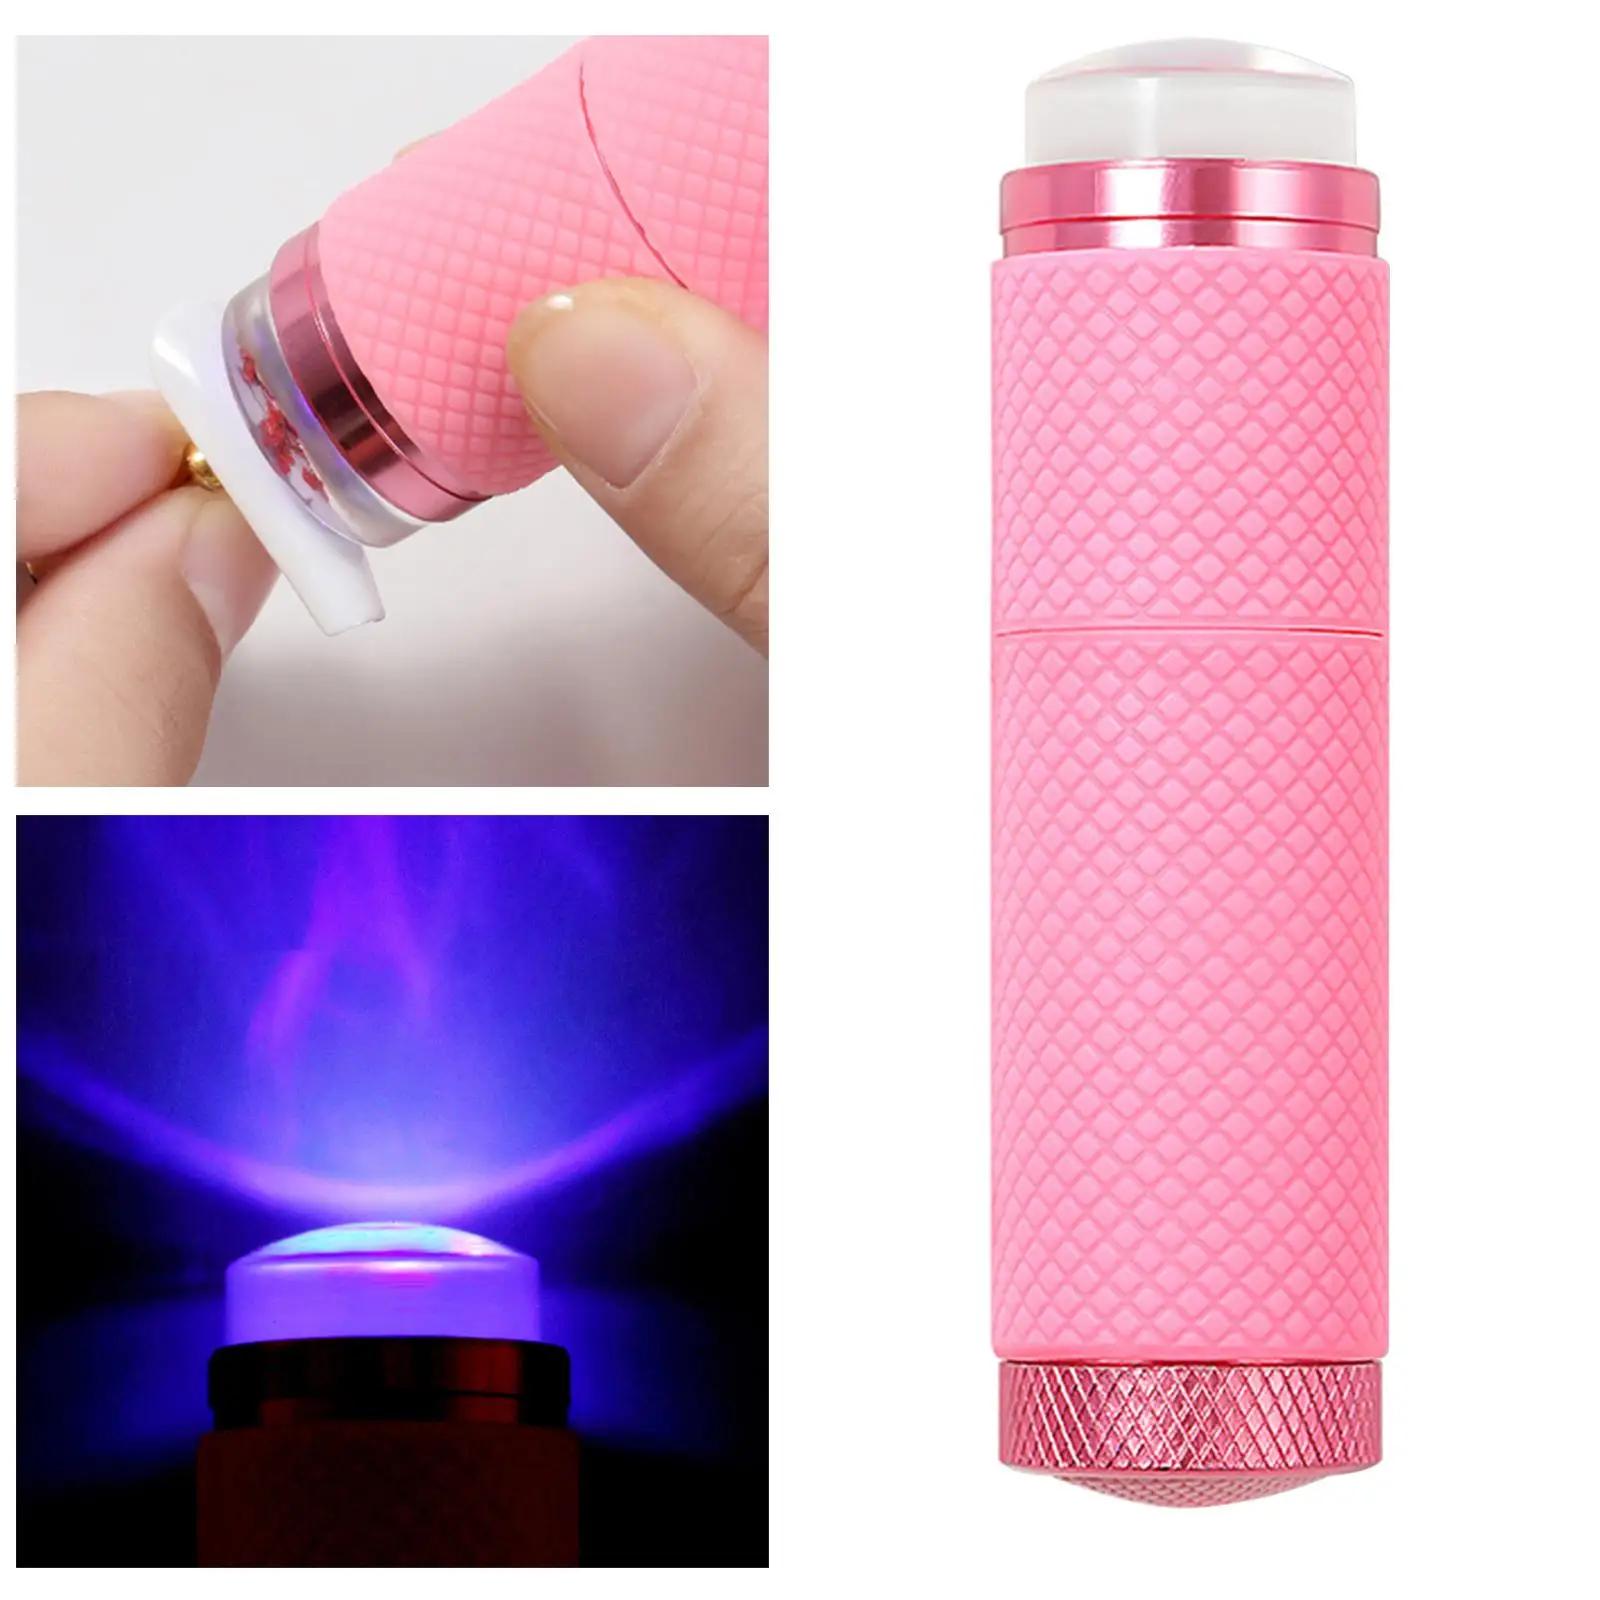 UV Light Presser Double Head Portable Nail Polish Drying Lamp for Gel and Regular Polish Manicure Decor Quick Nail Touch-Ups